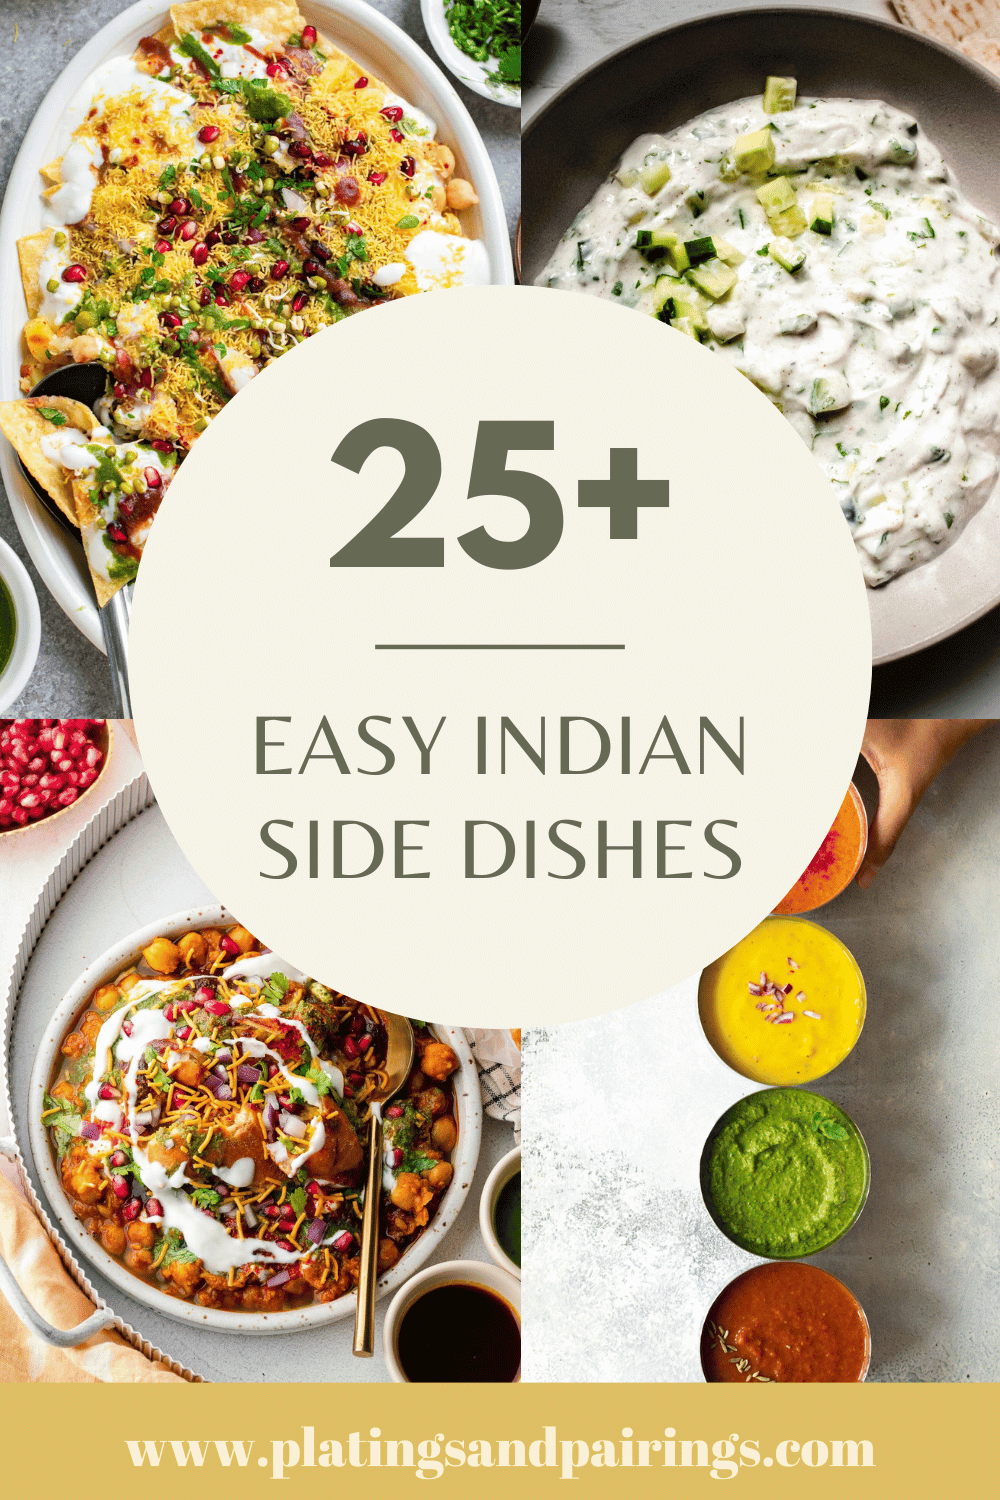 Collage of indian side dishes with text overlay.